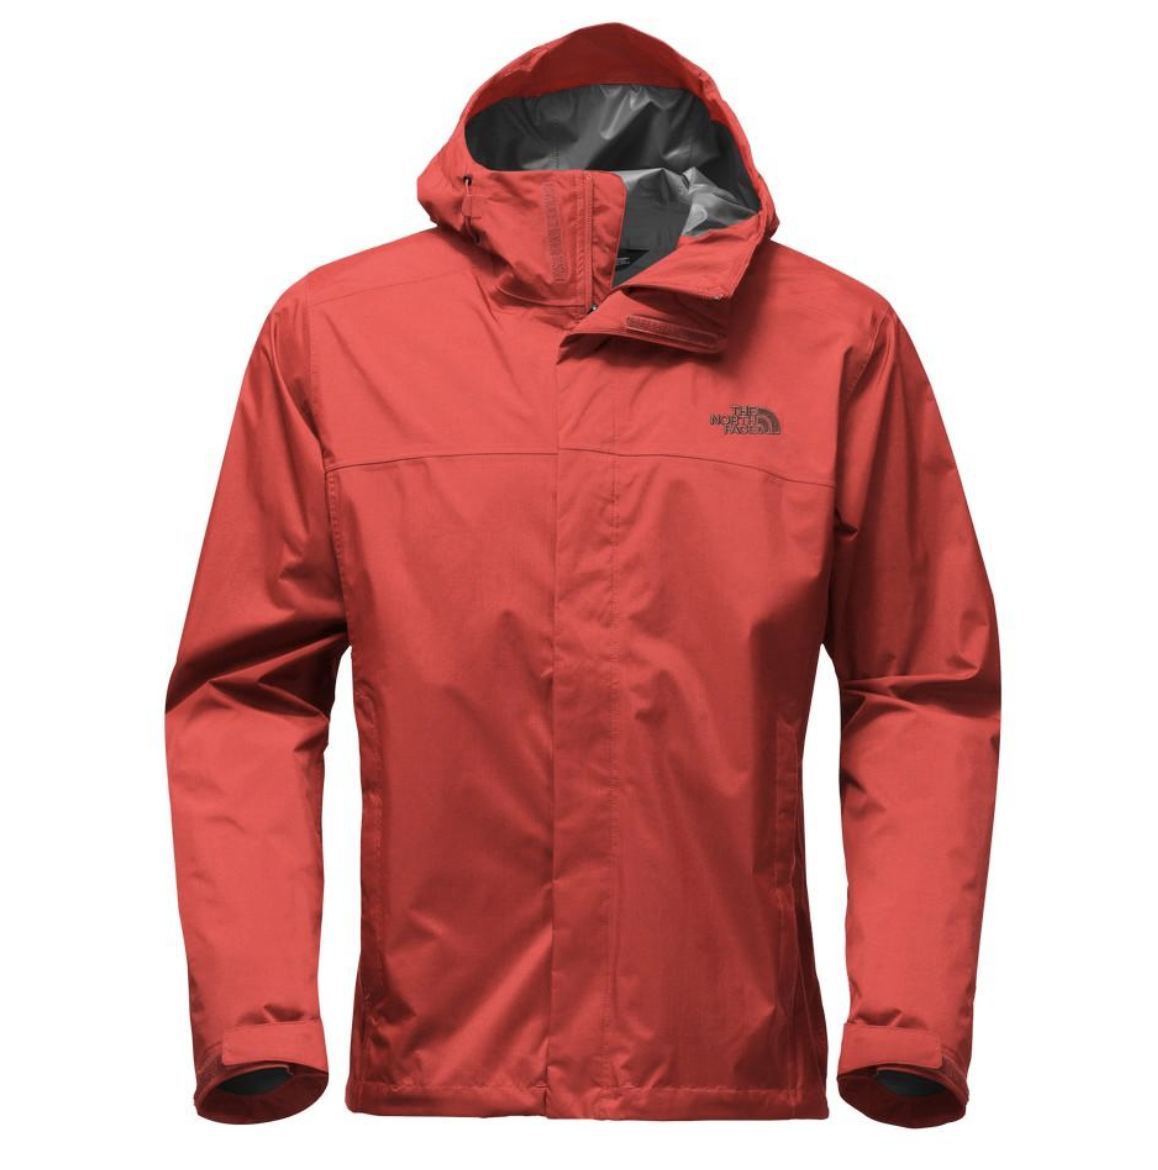 THE NORTH FACE North Face Men's Venture 2 Jacket